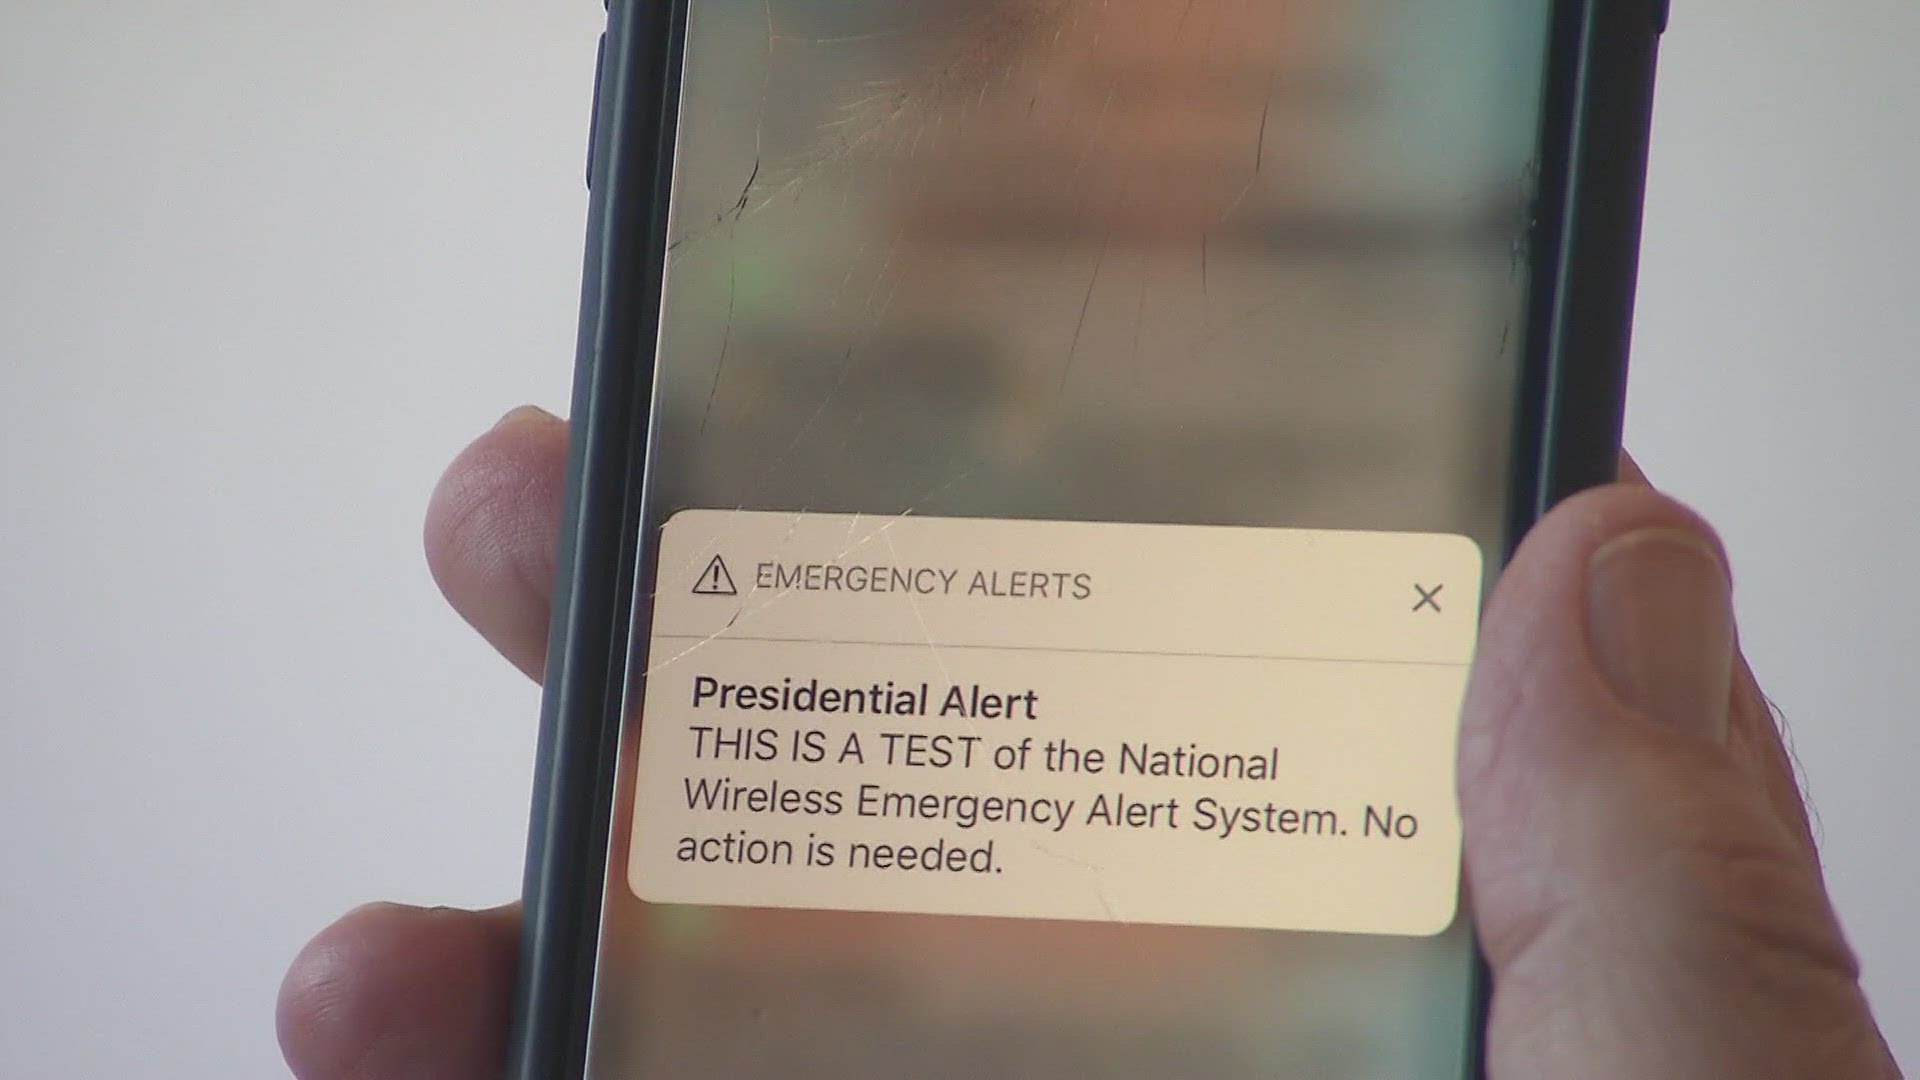 Why was there an emergency alert today? EAS test on Wednesday